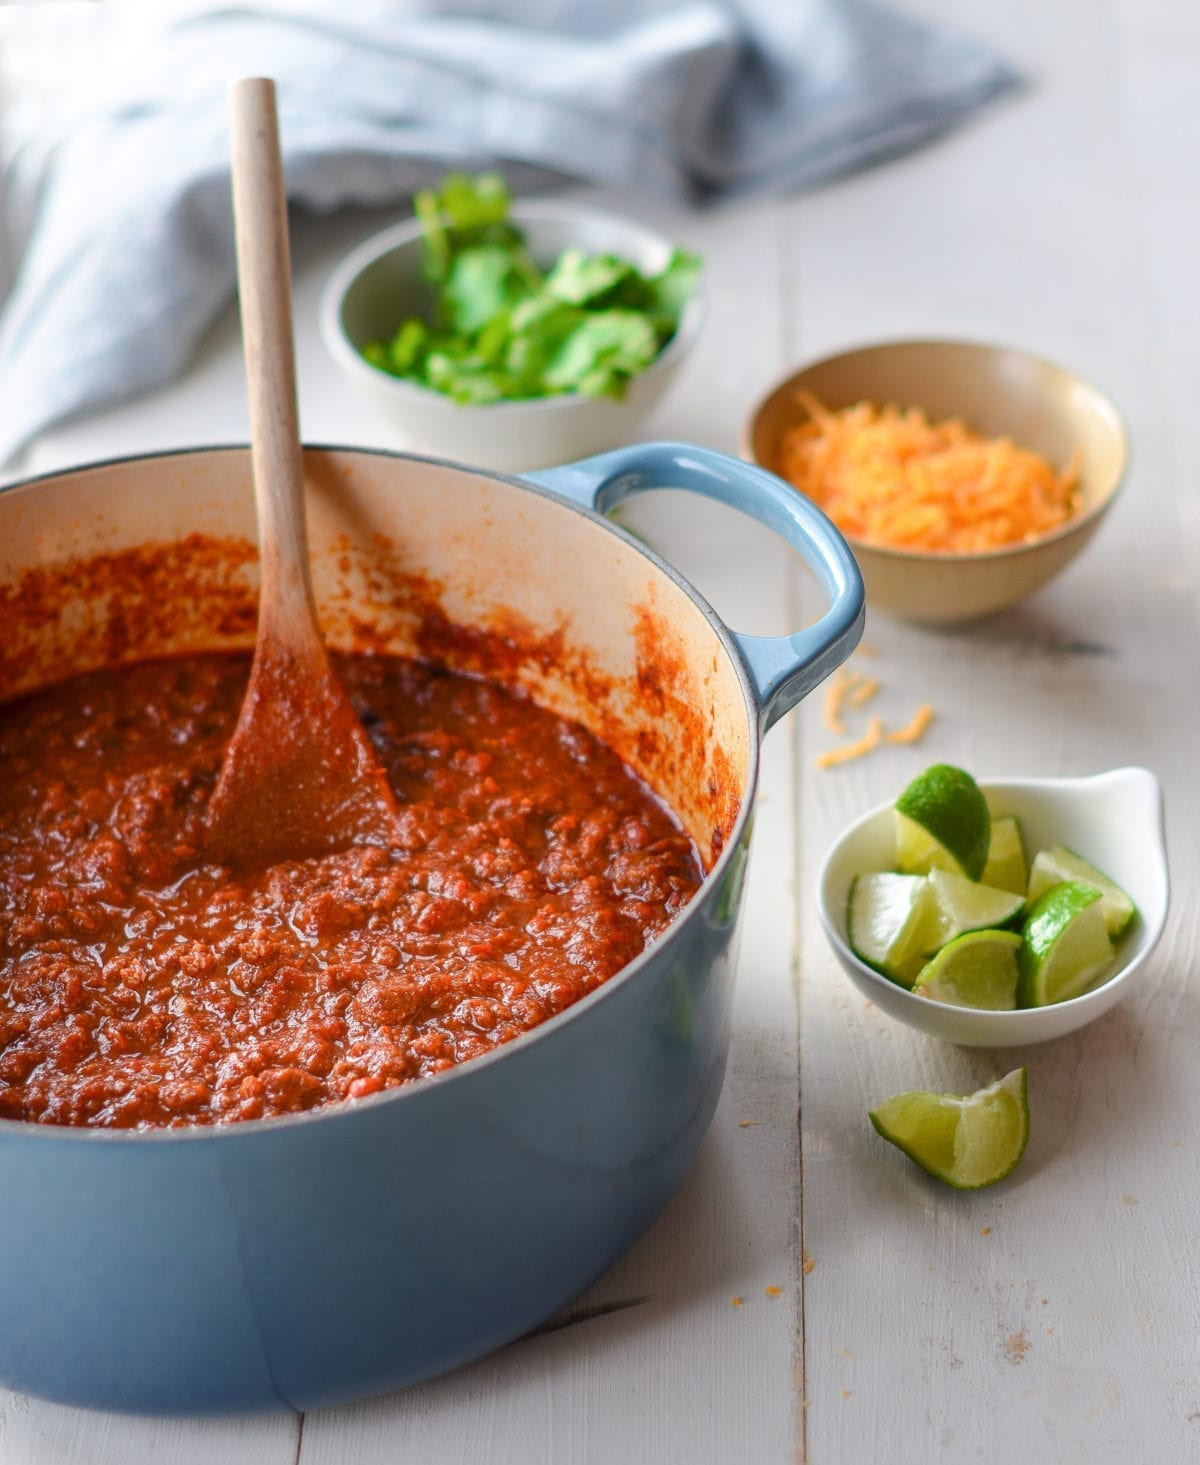 Chili Recipes With Beef
 Best Ground Beef Chili ce Upon a Chef